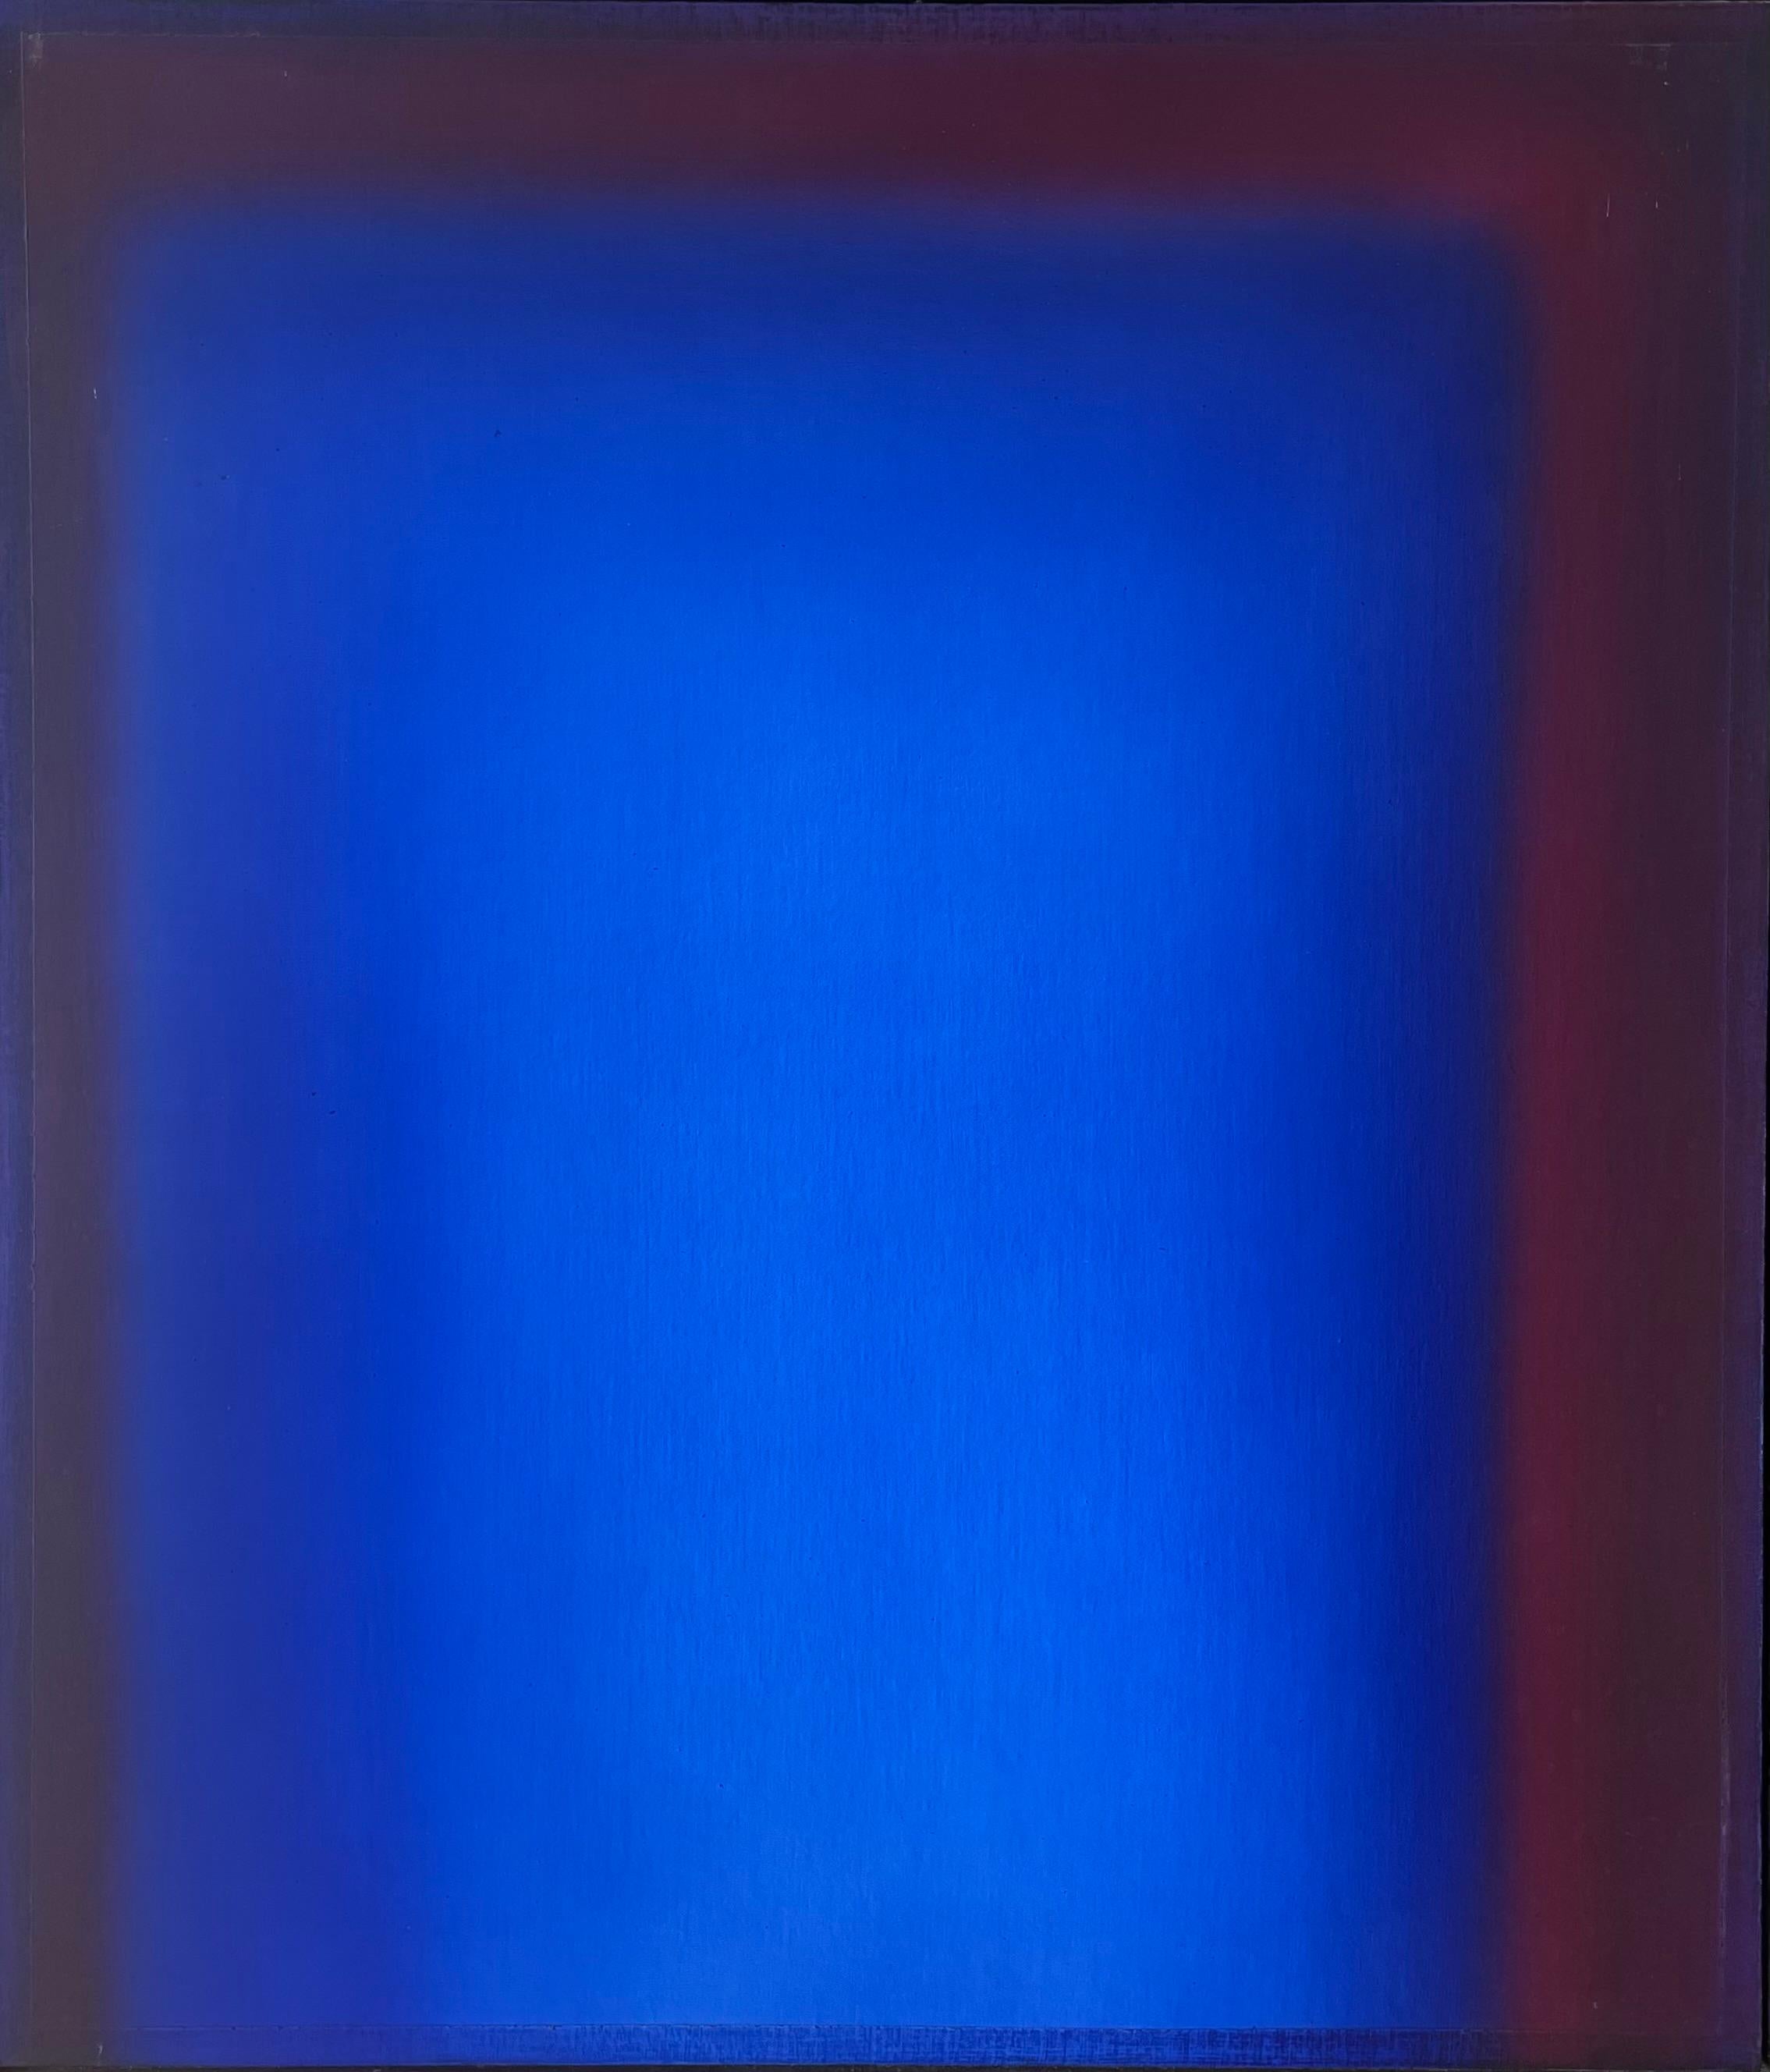 Untitled - - Blue, Maroon & Violet - Magical painting!